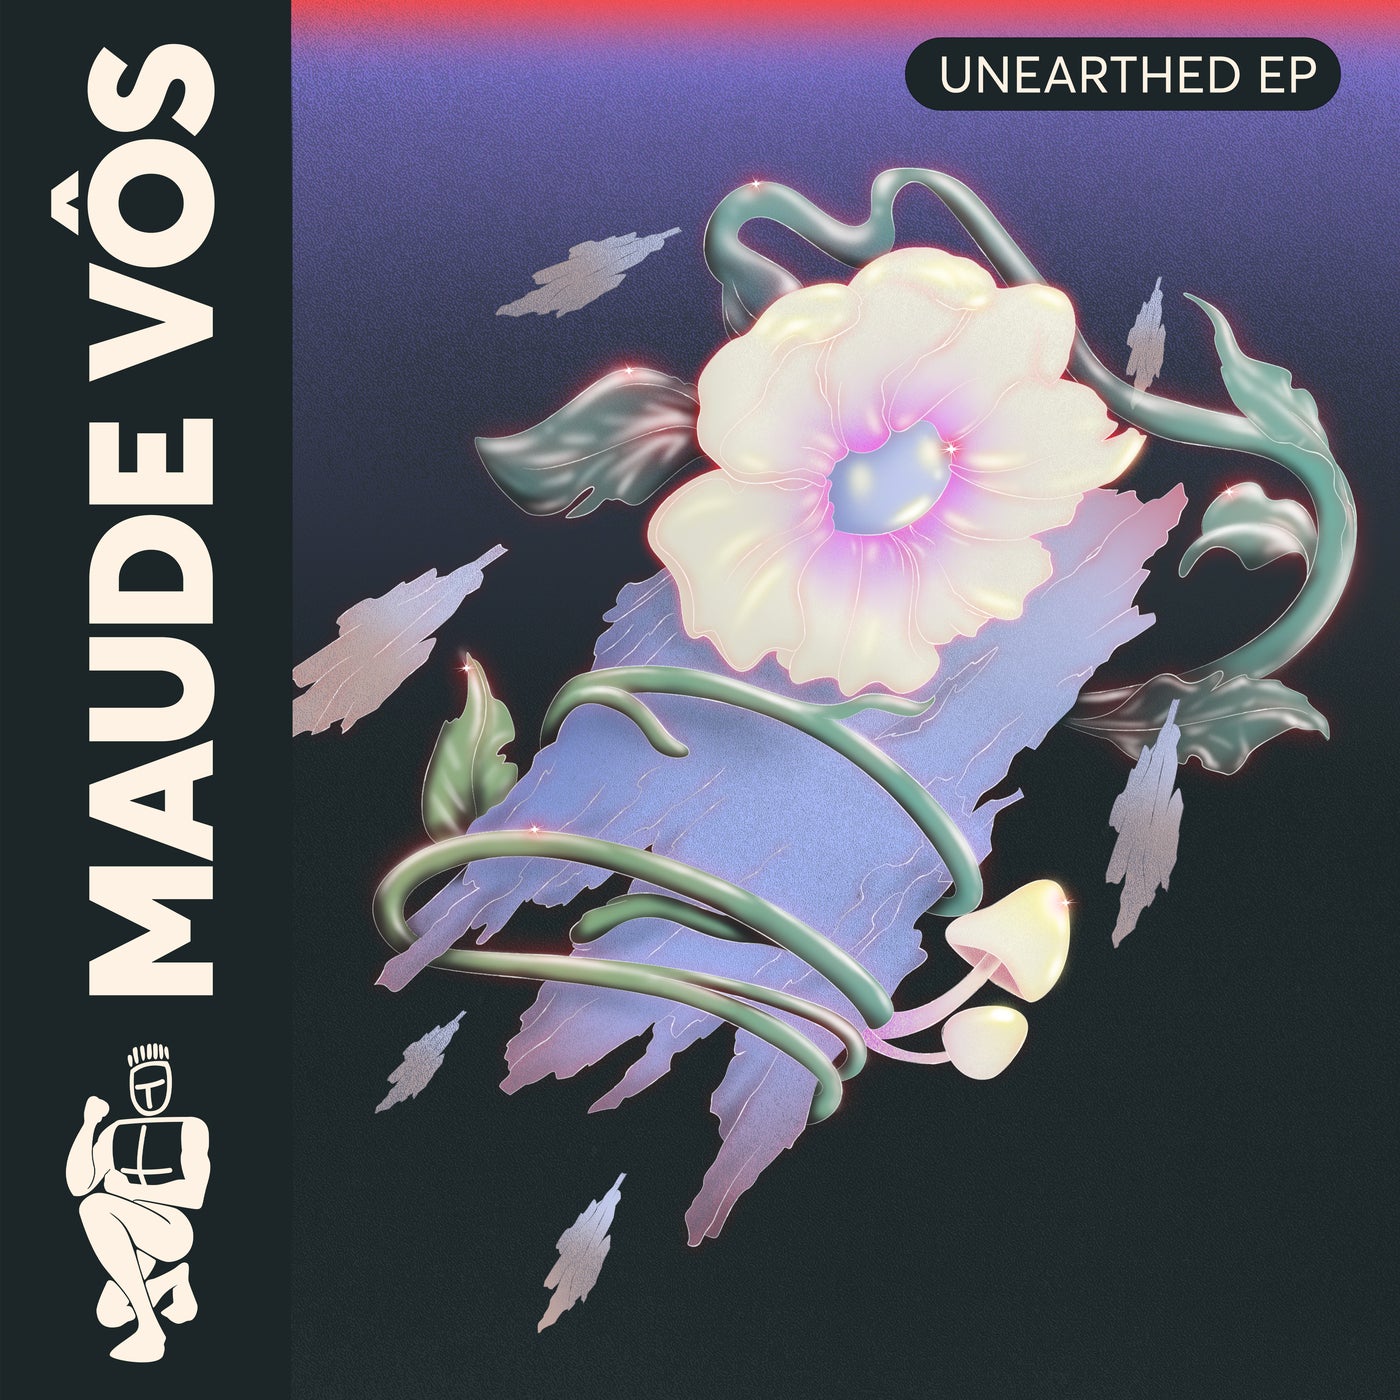 Unearthed EP